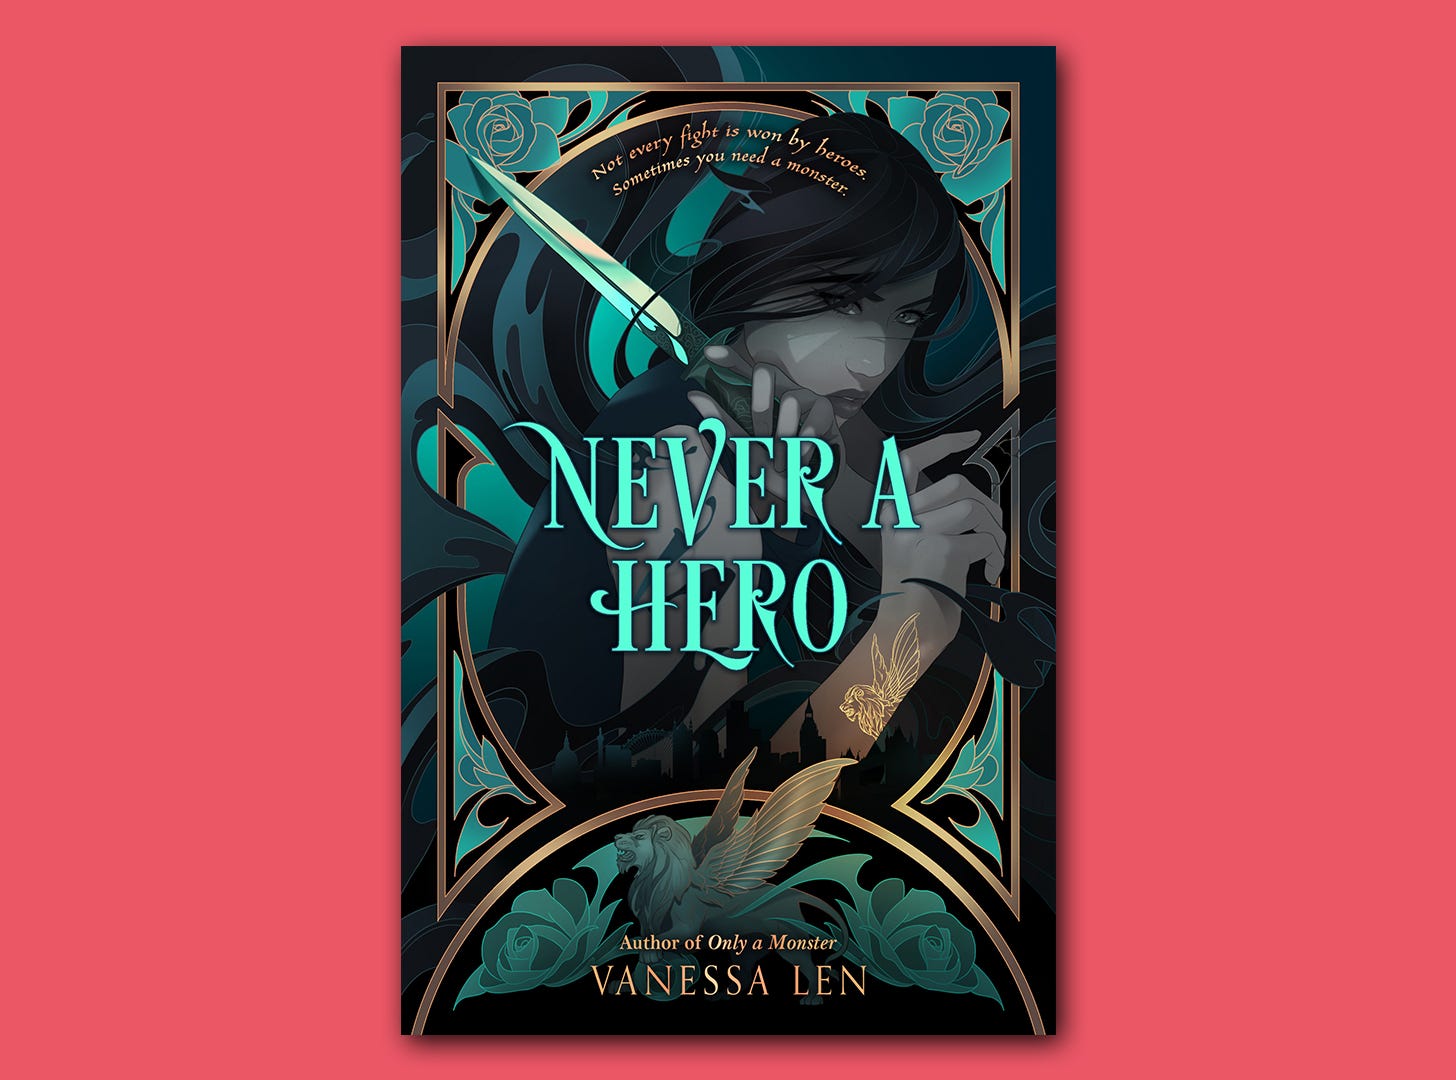 The book cover for 'Never a Hero' superimposed on a light pink colour block background. The book cover has an illustration of a girl holding a dagger with a golden tattoo on the back of her hand. The tagline reads 'Not every fight is won by heroes. Sometimes you need a monster.'